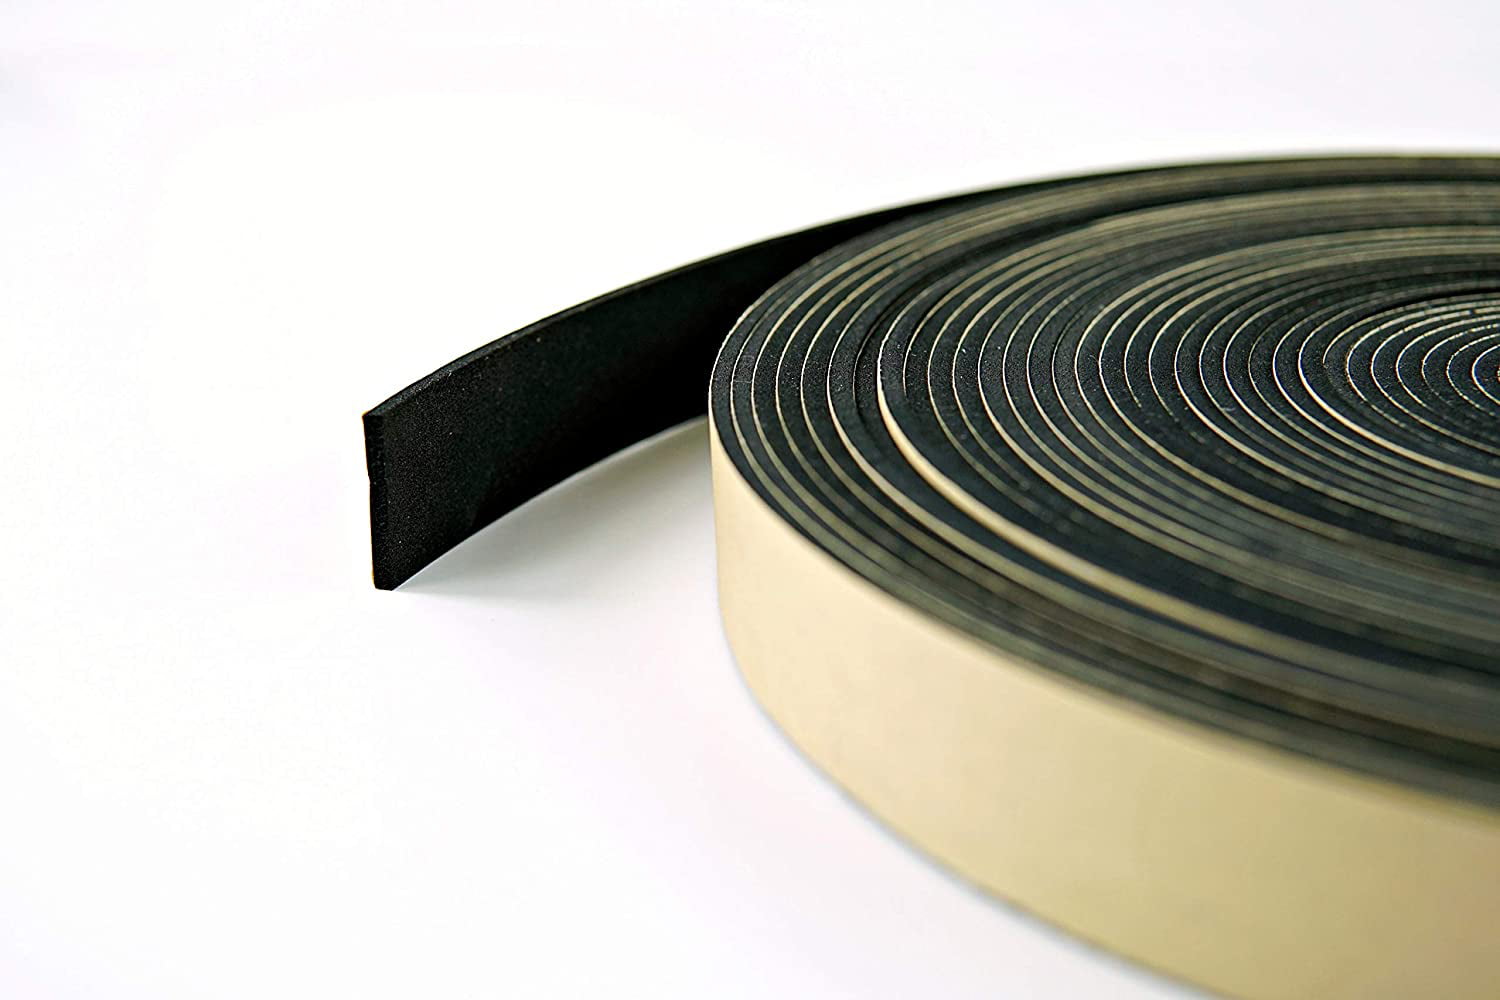 1/2inch x 1/8inch x 50feet Neoprene Foam Weather Seal High Density Stripping with Adhesive Backing 1.3cm Wide 0.3cm Thick 15m Long